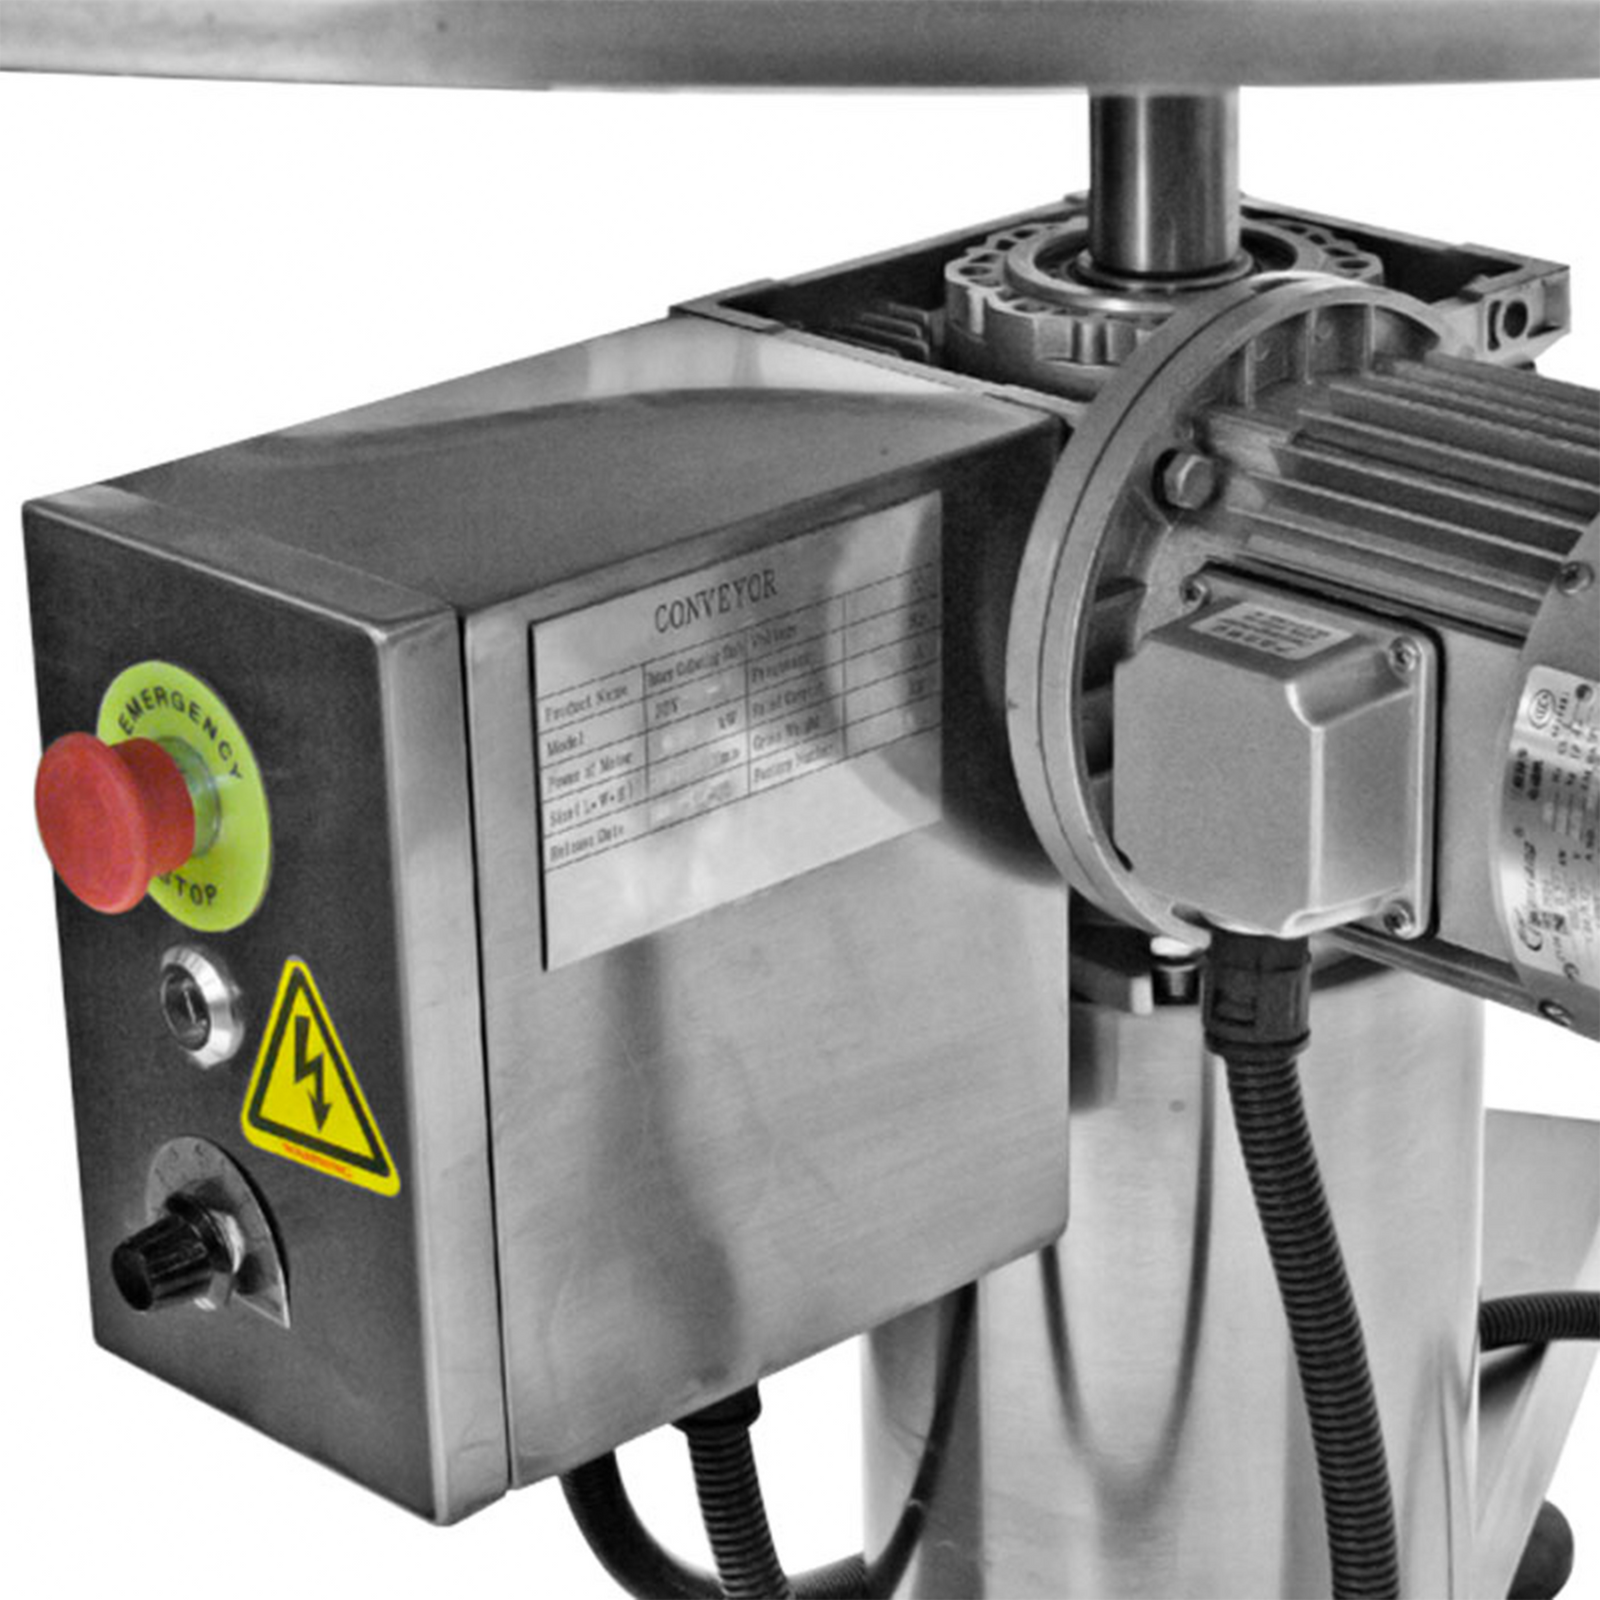 close up of stainless steel JORES TECHNOLOGIES® rotary accumulating table with red emergency stop bottom and yellow warning label